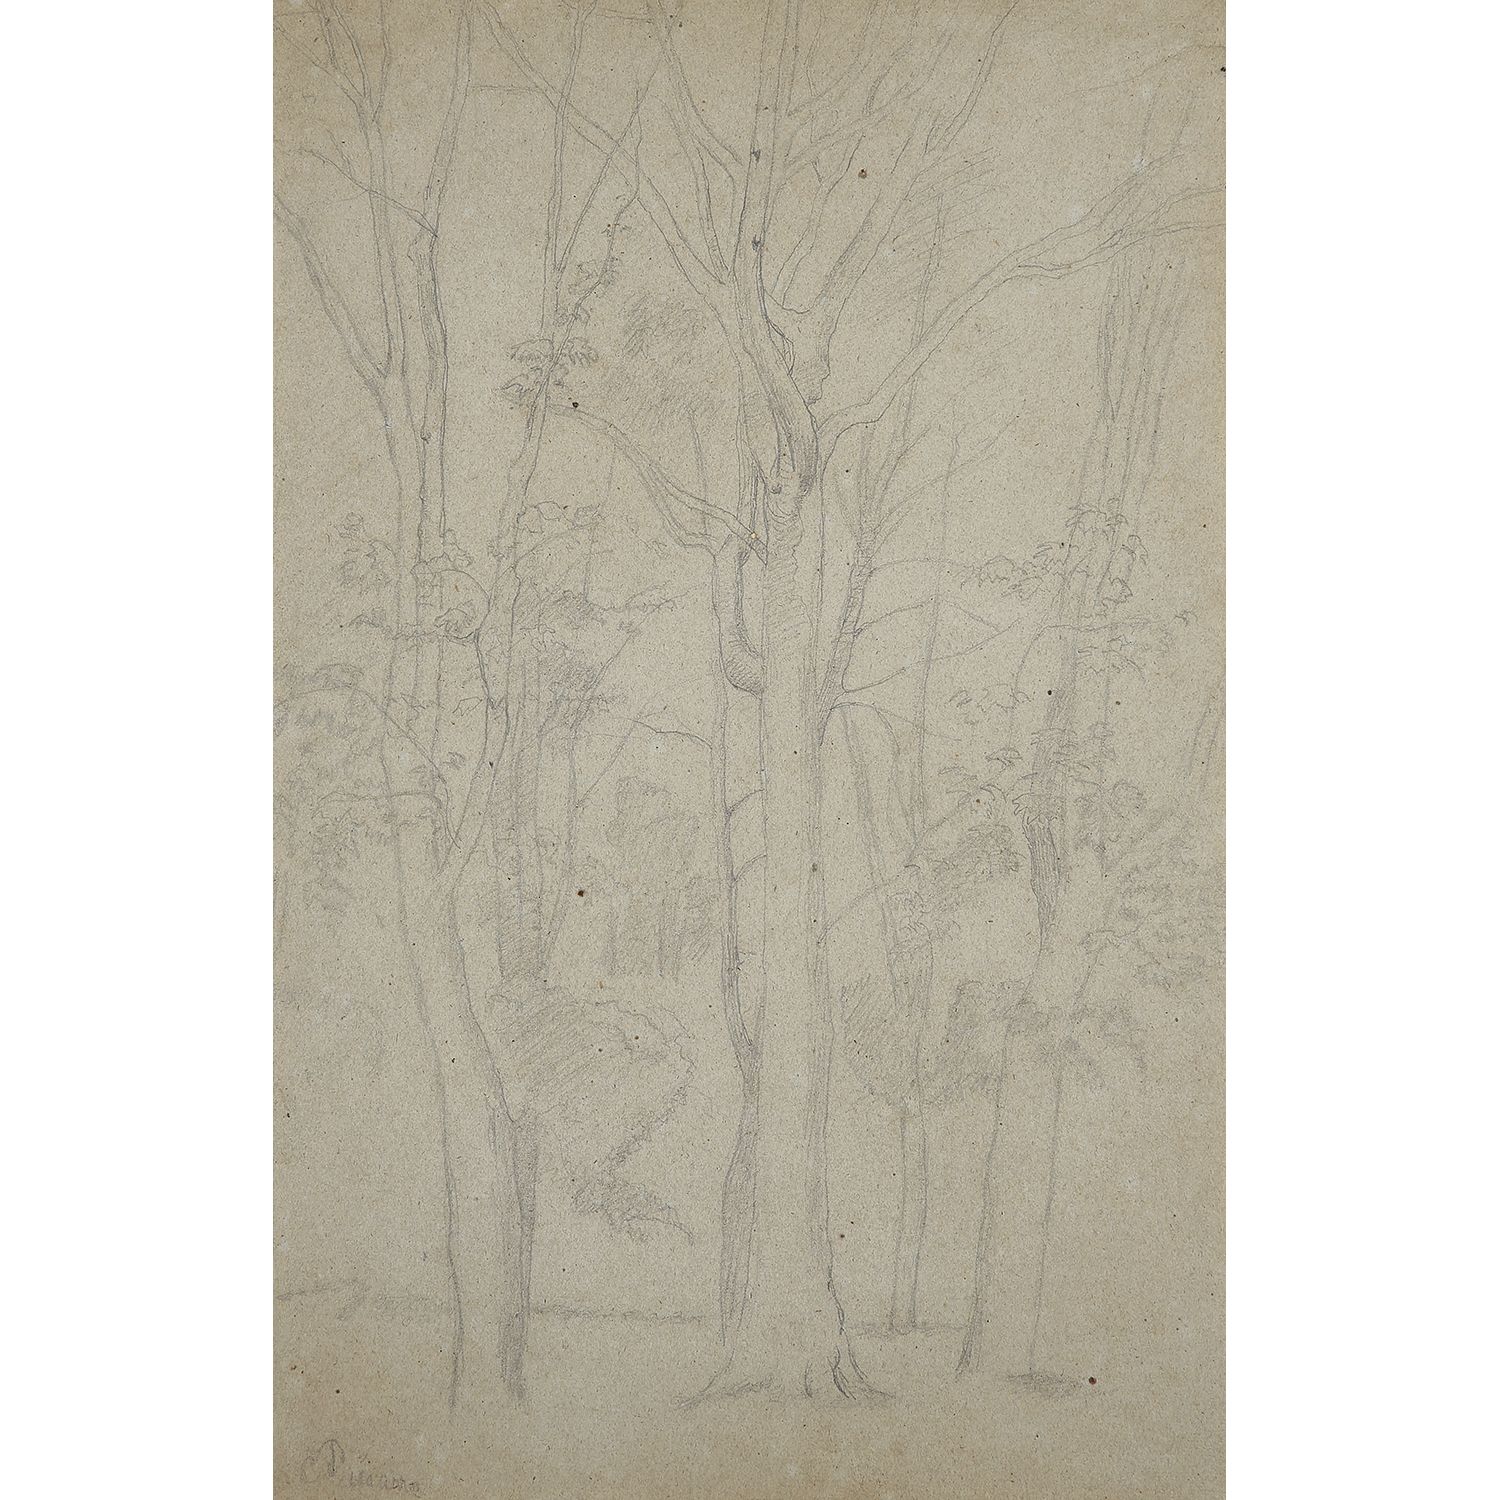 Null CAMILLE PISSARRO (1830-1903) 
TREES 
Pencil on paper 
Signed lower left
 Pe&hellip;